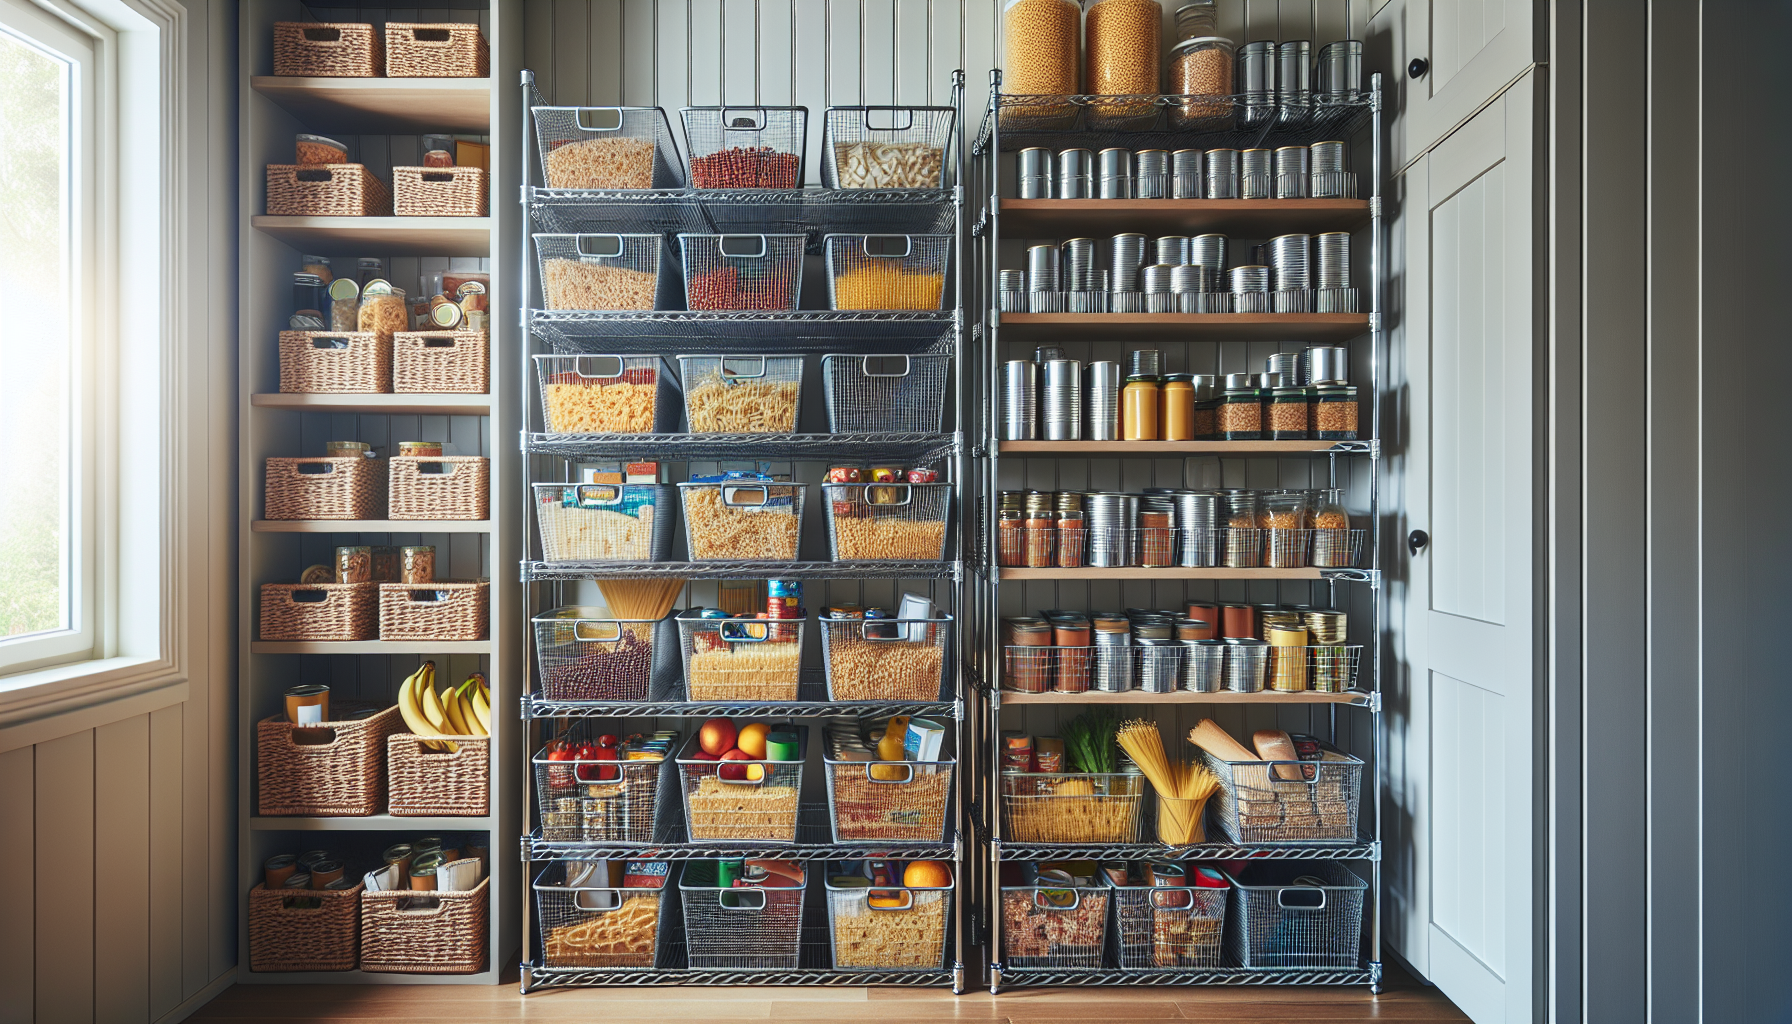 Utilizing vertical space with stackable wire baskets in a pantry